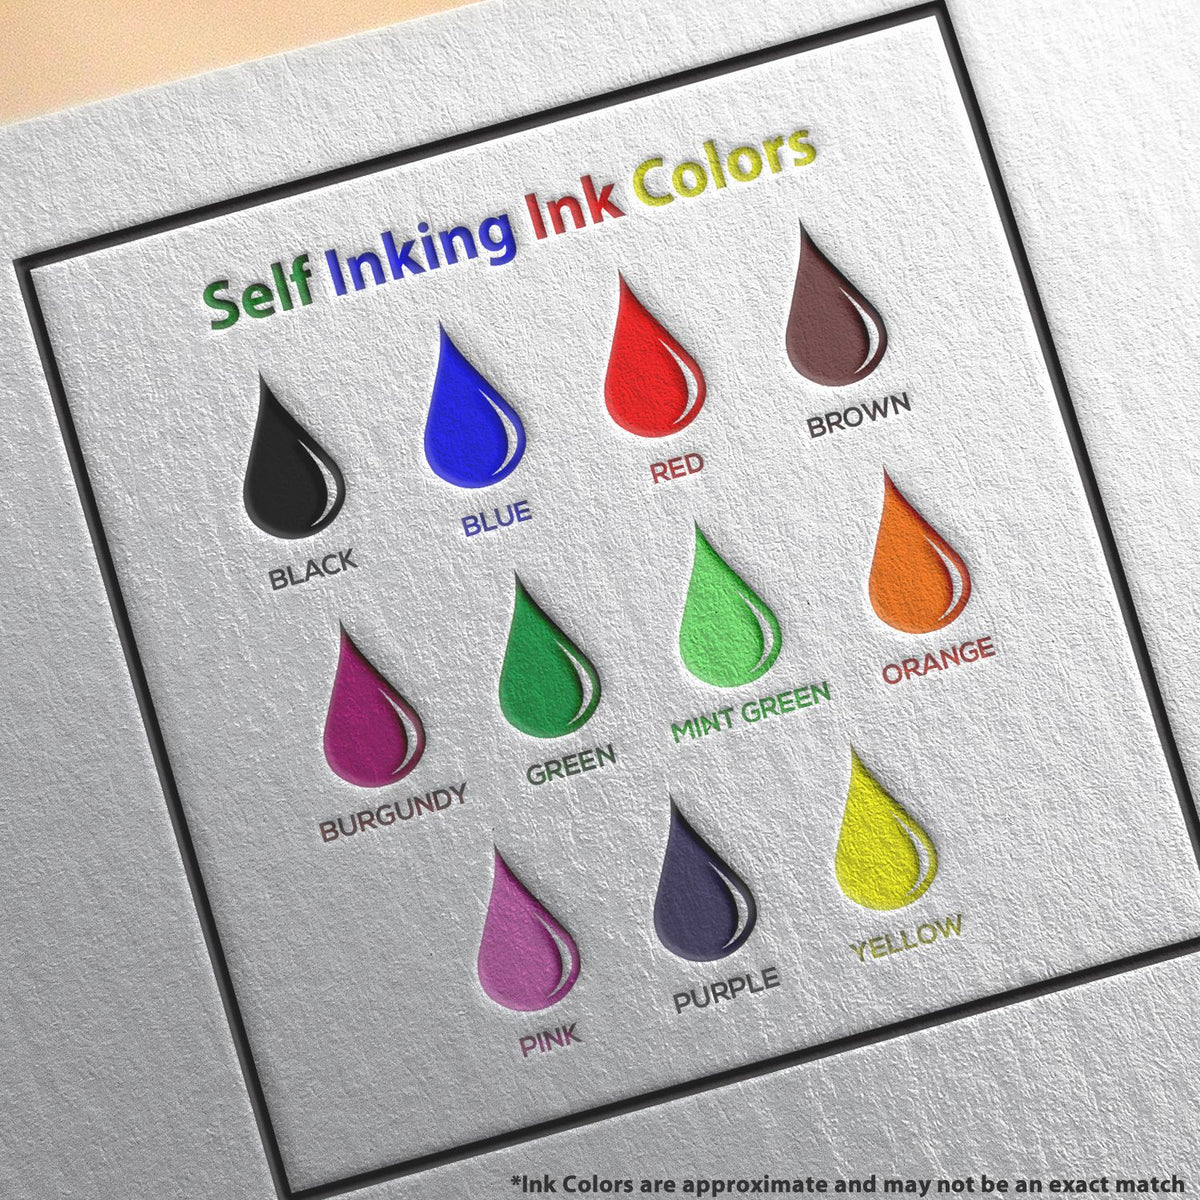 A picture showing the different ink colors or hues available for the Self-Inking Georgia Geologist Stamp